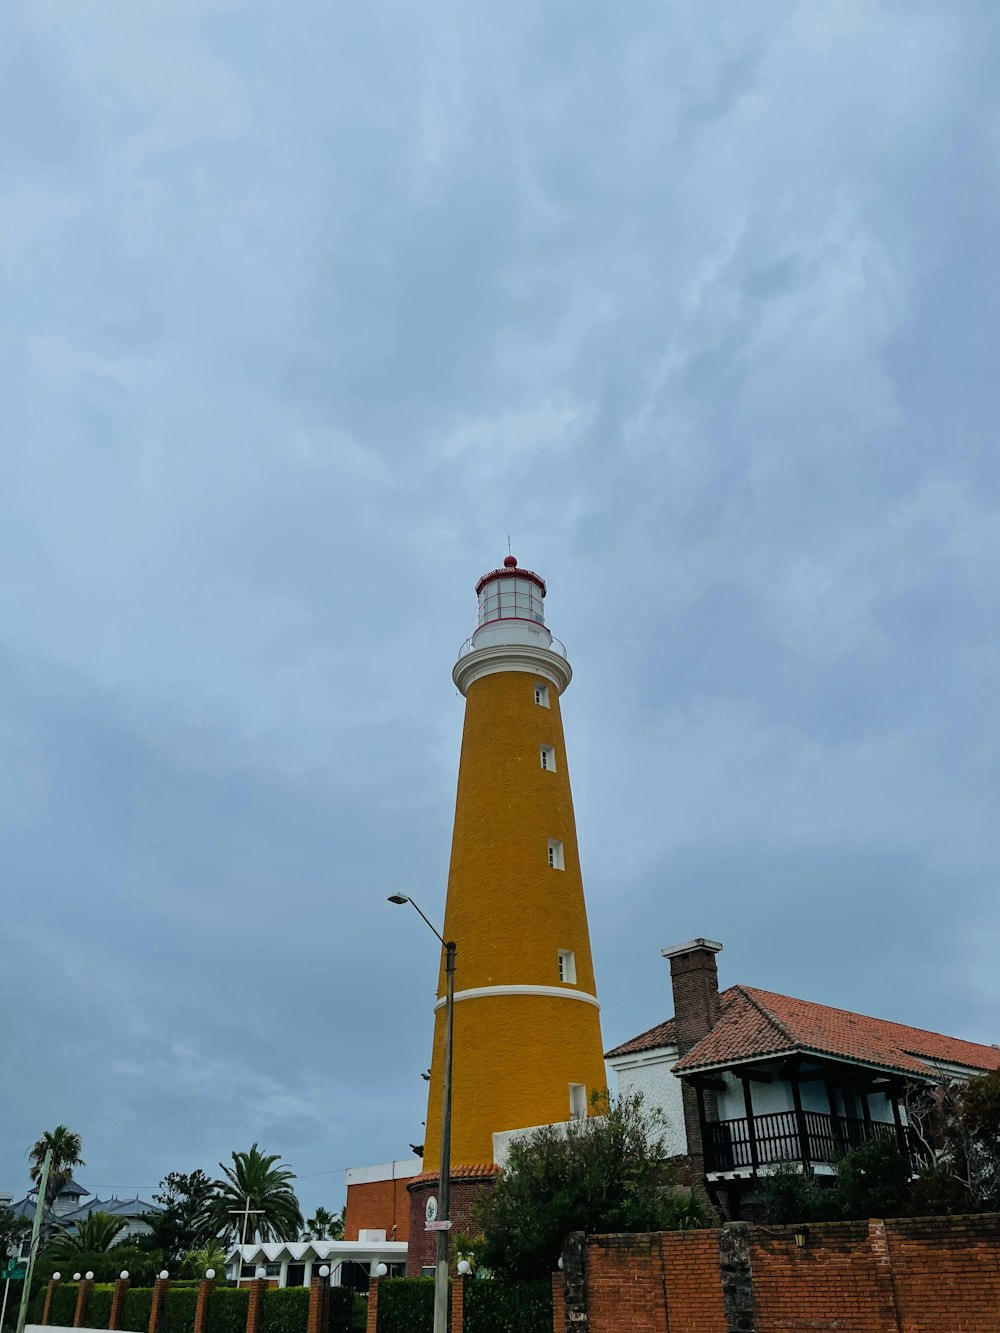 a yellow and white lighthouse on a cloudy day